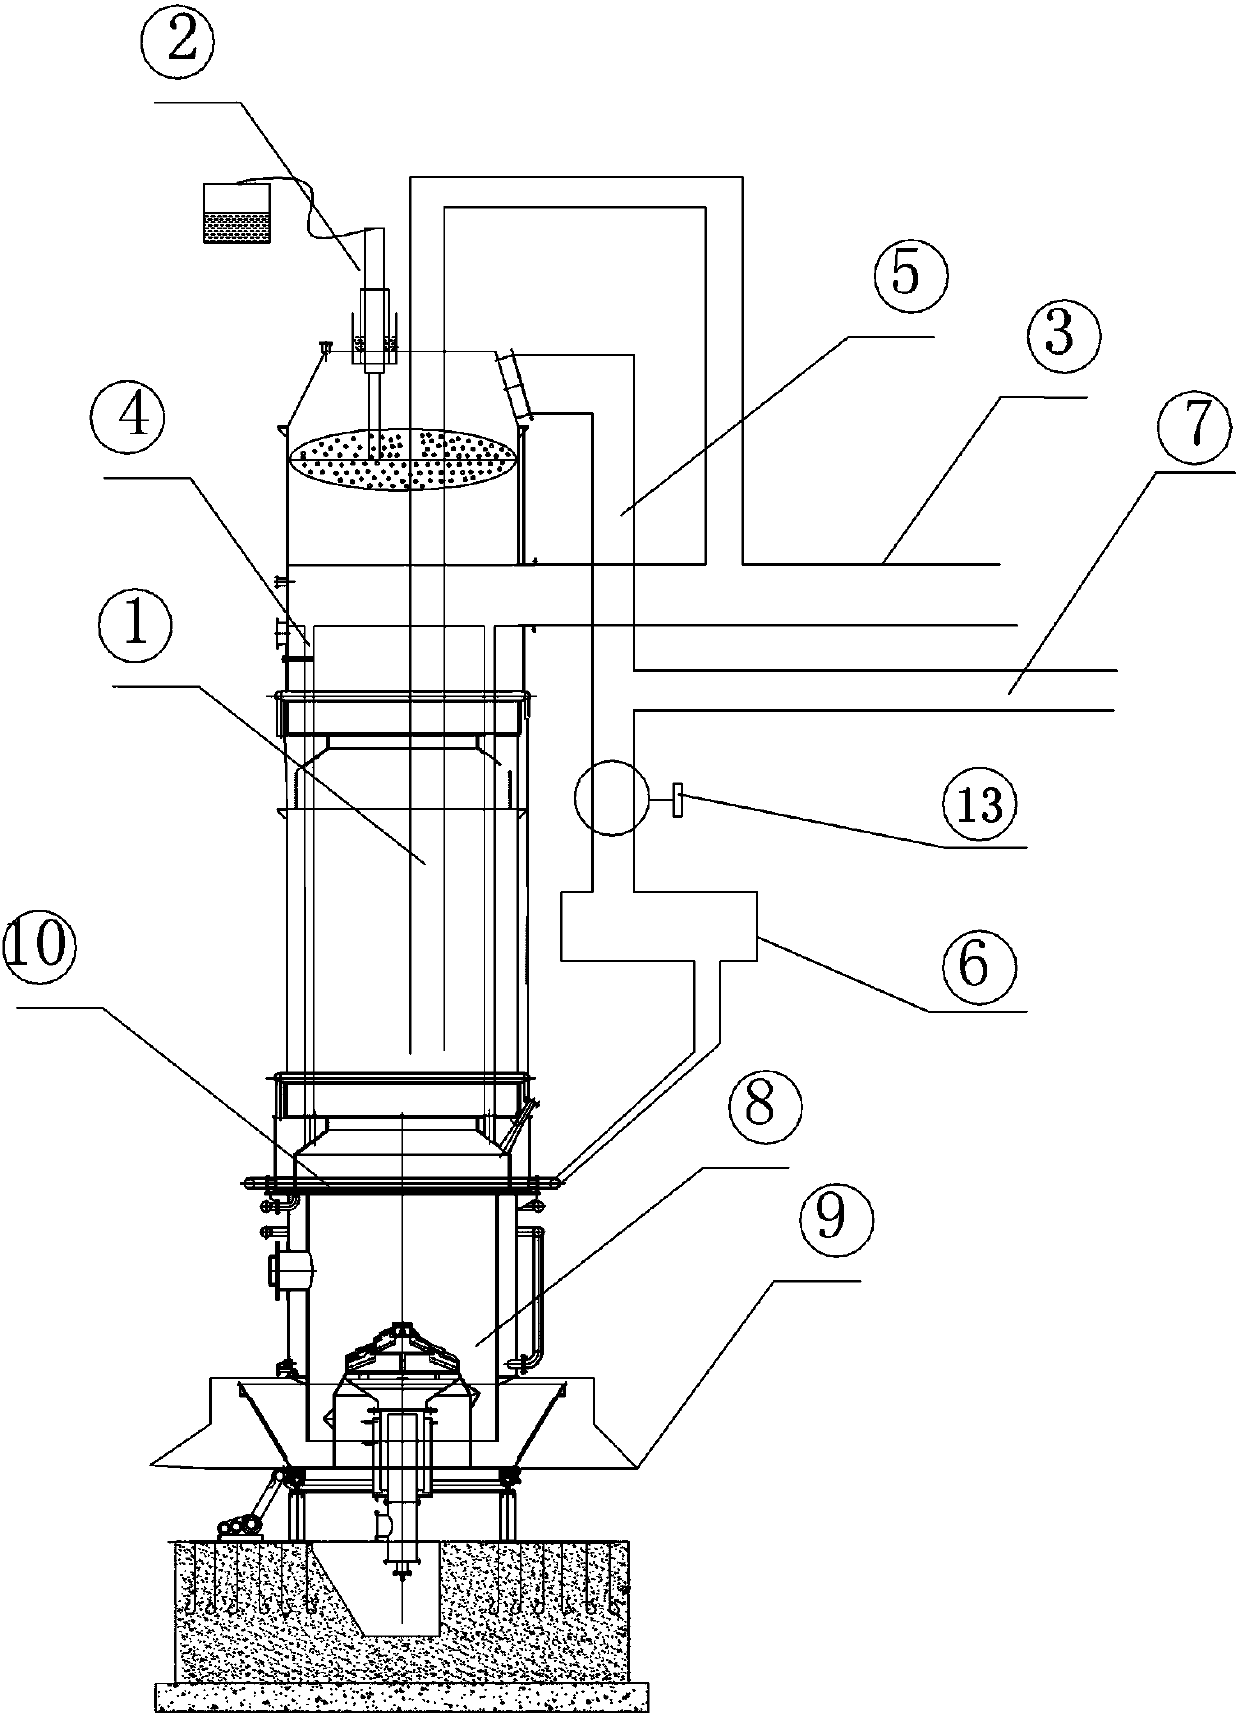 Multi-stage clean and efficient domestic waste pyrolysis gasification furnace and process